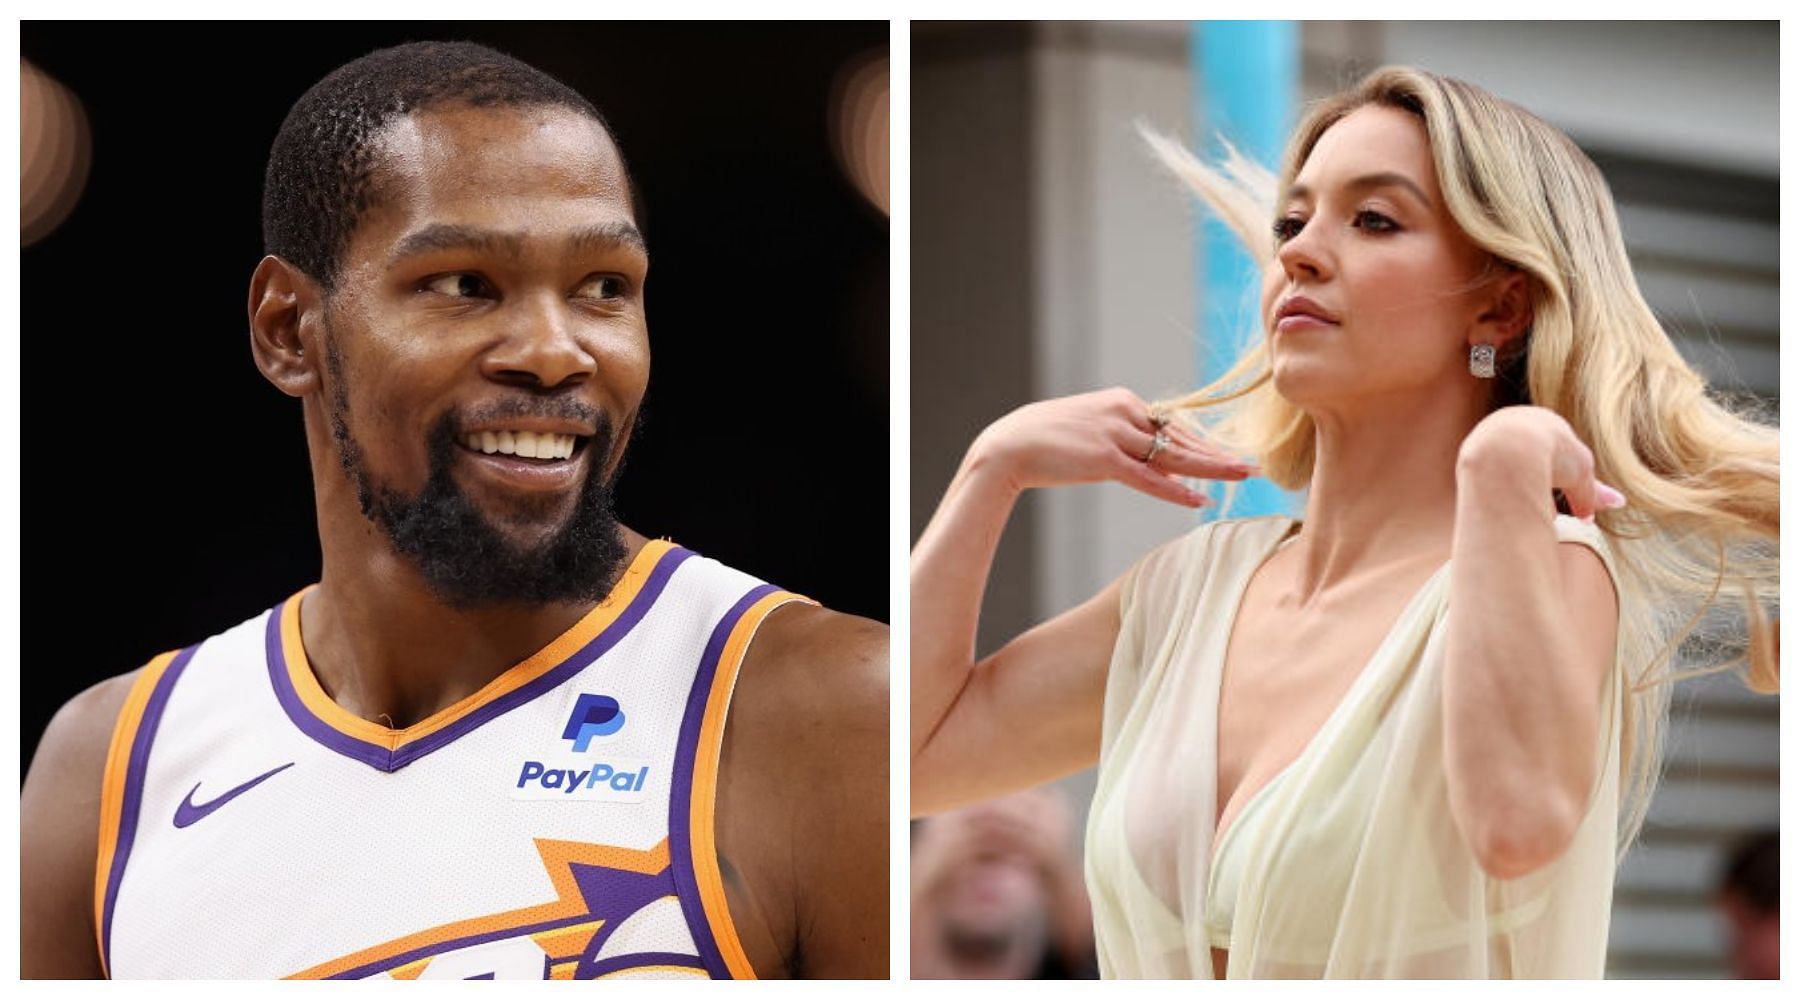 Kevin Durant and Sydney Sweeney. (Image via NBA.com, Anyone But You)